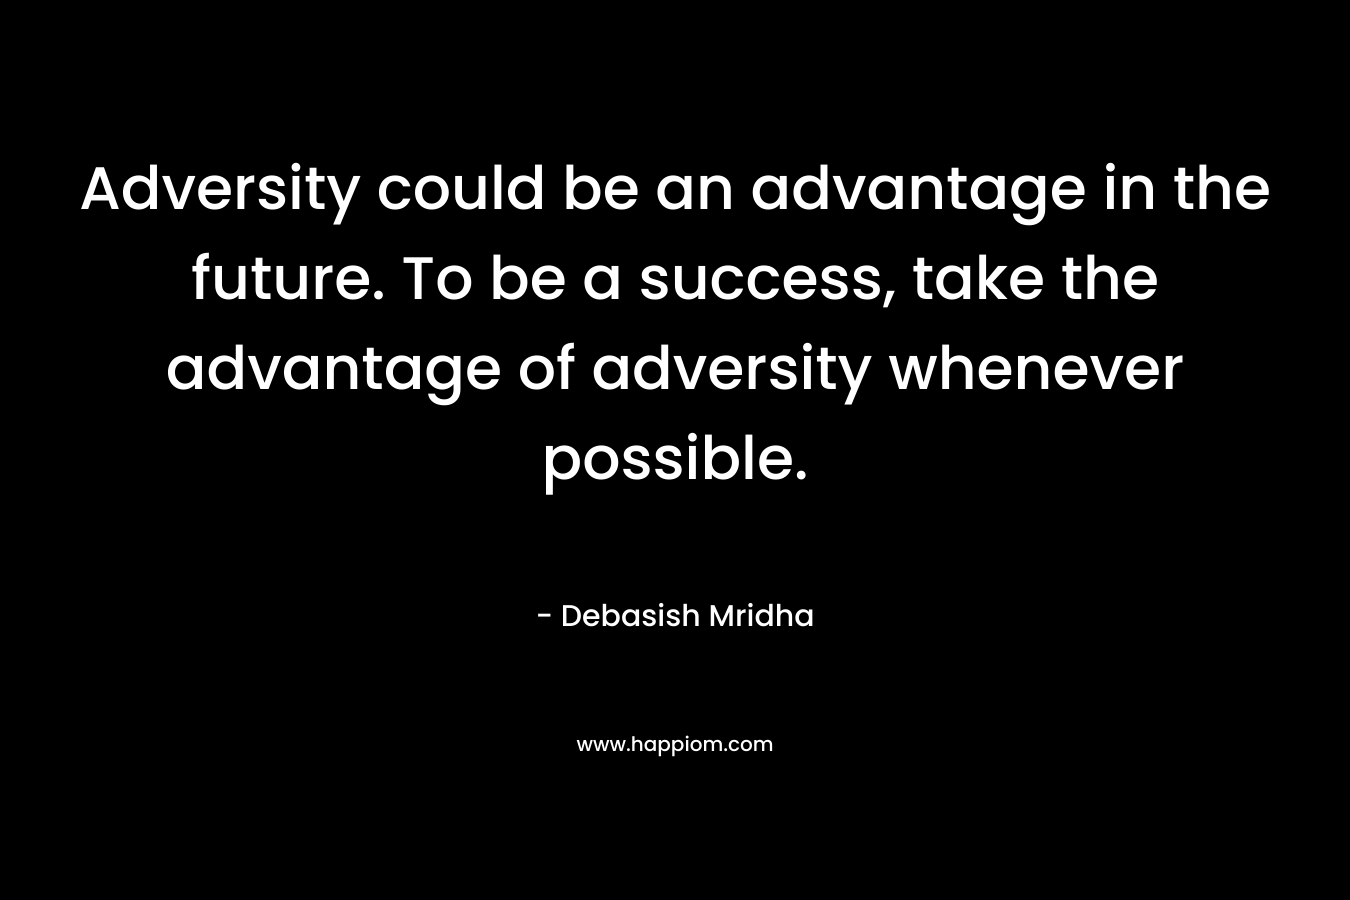 Adversity could be an advantage in the future. To be a success, take the advantage of adversity whenever possible.